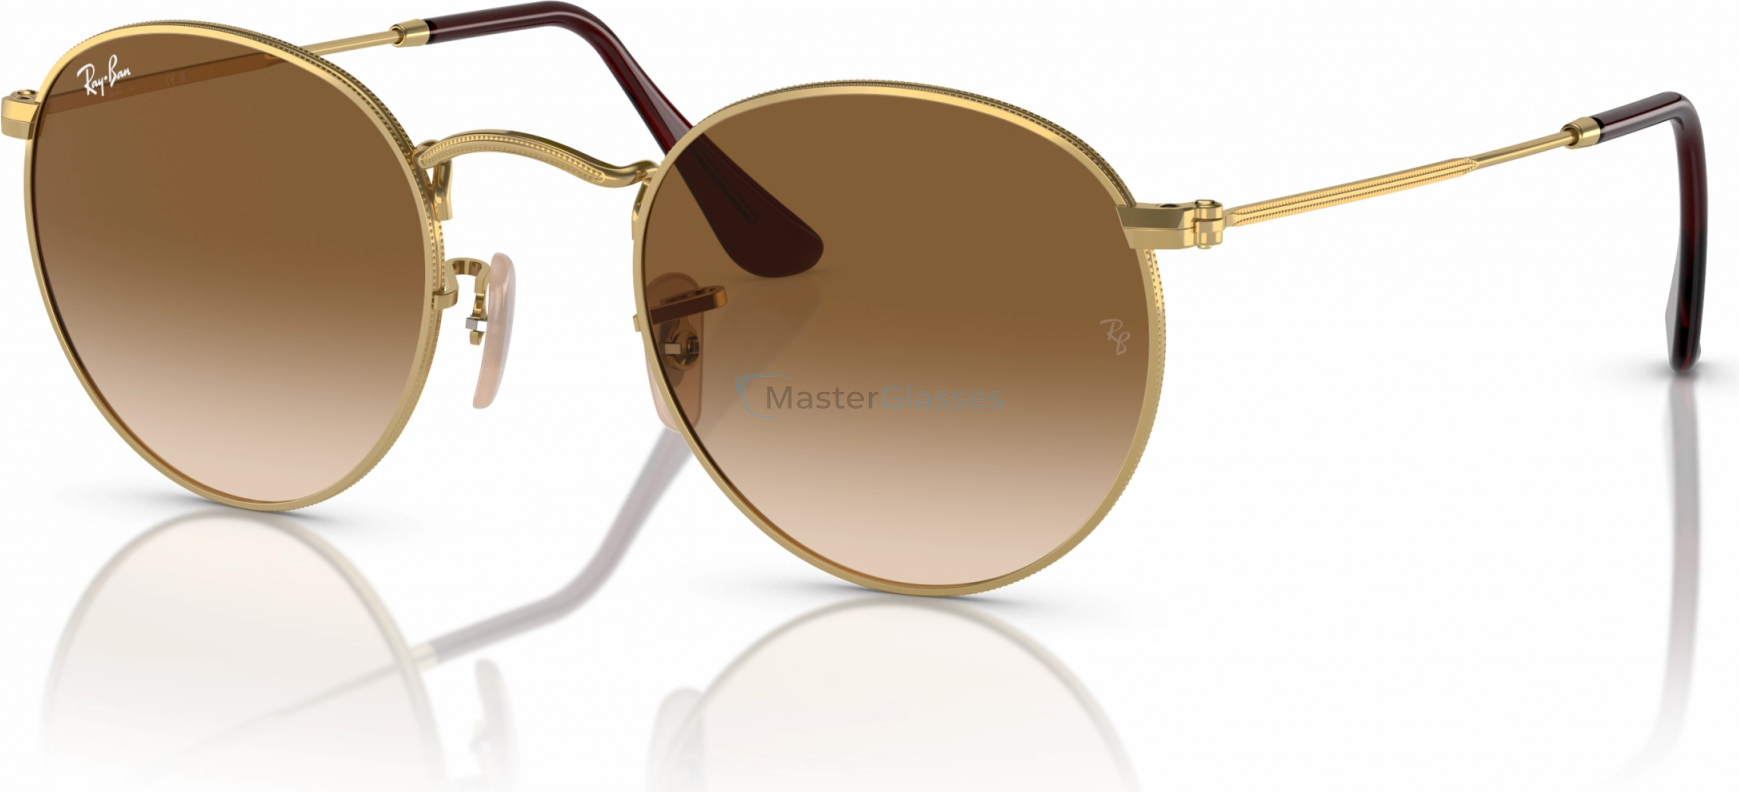   Ray-Ban ROUND METAL RB3447 001/51 Gold